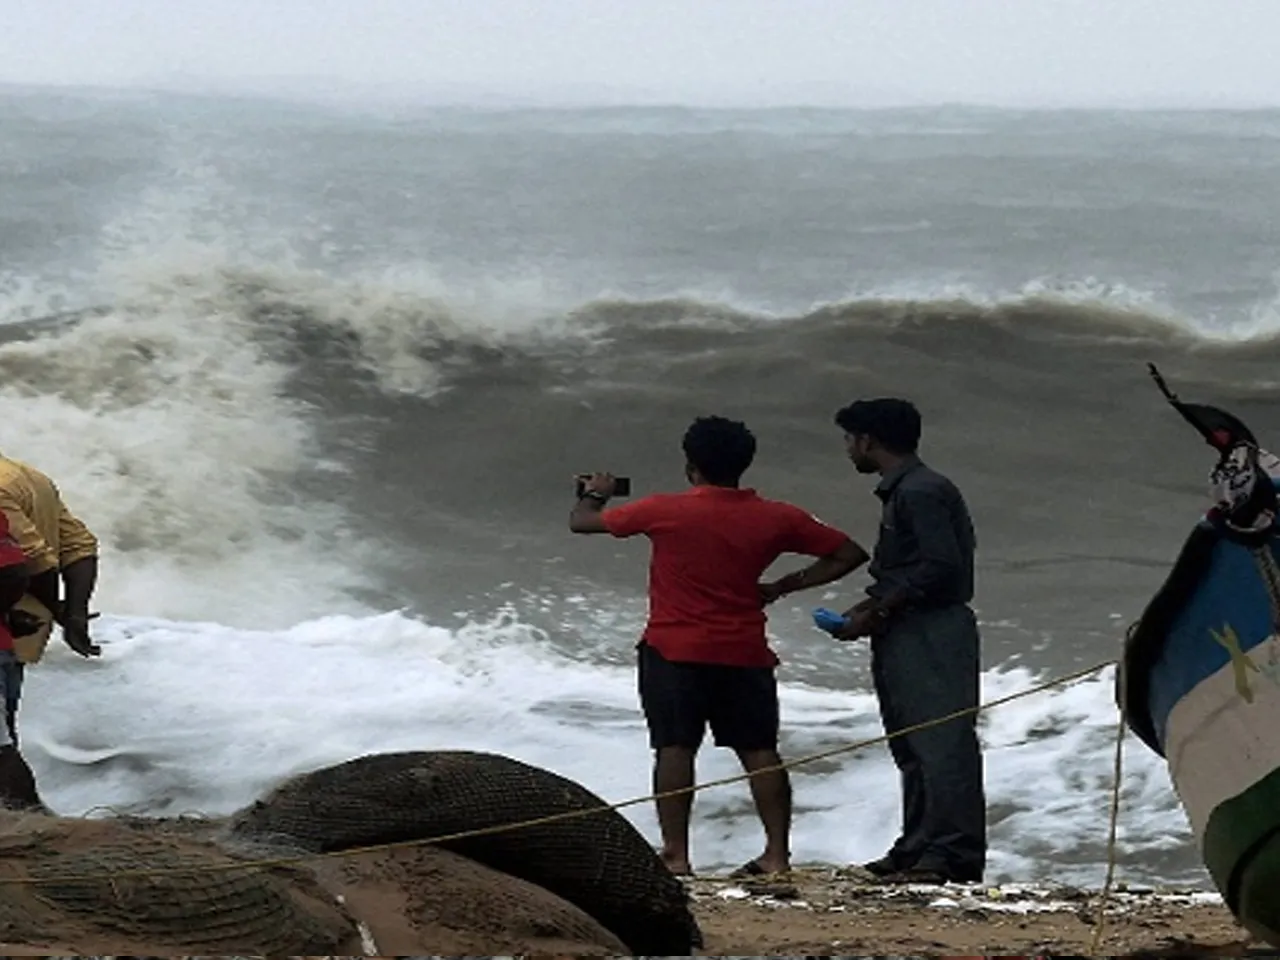 A cyclone is forming in the sea, warning is issued on the coast